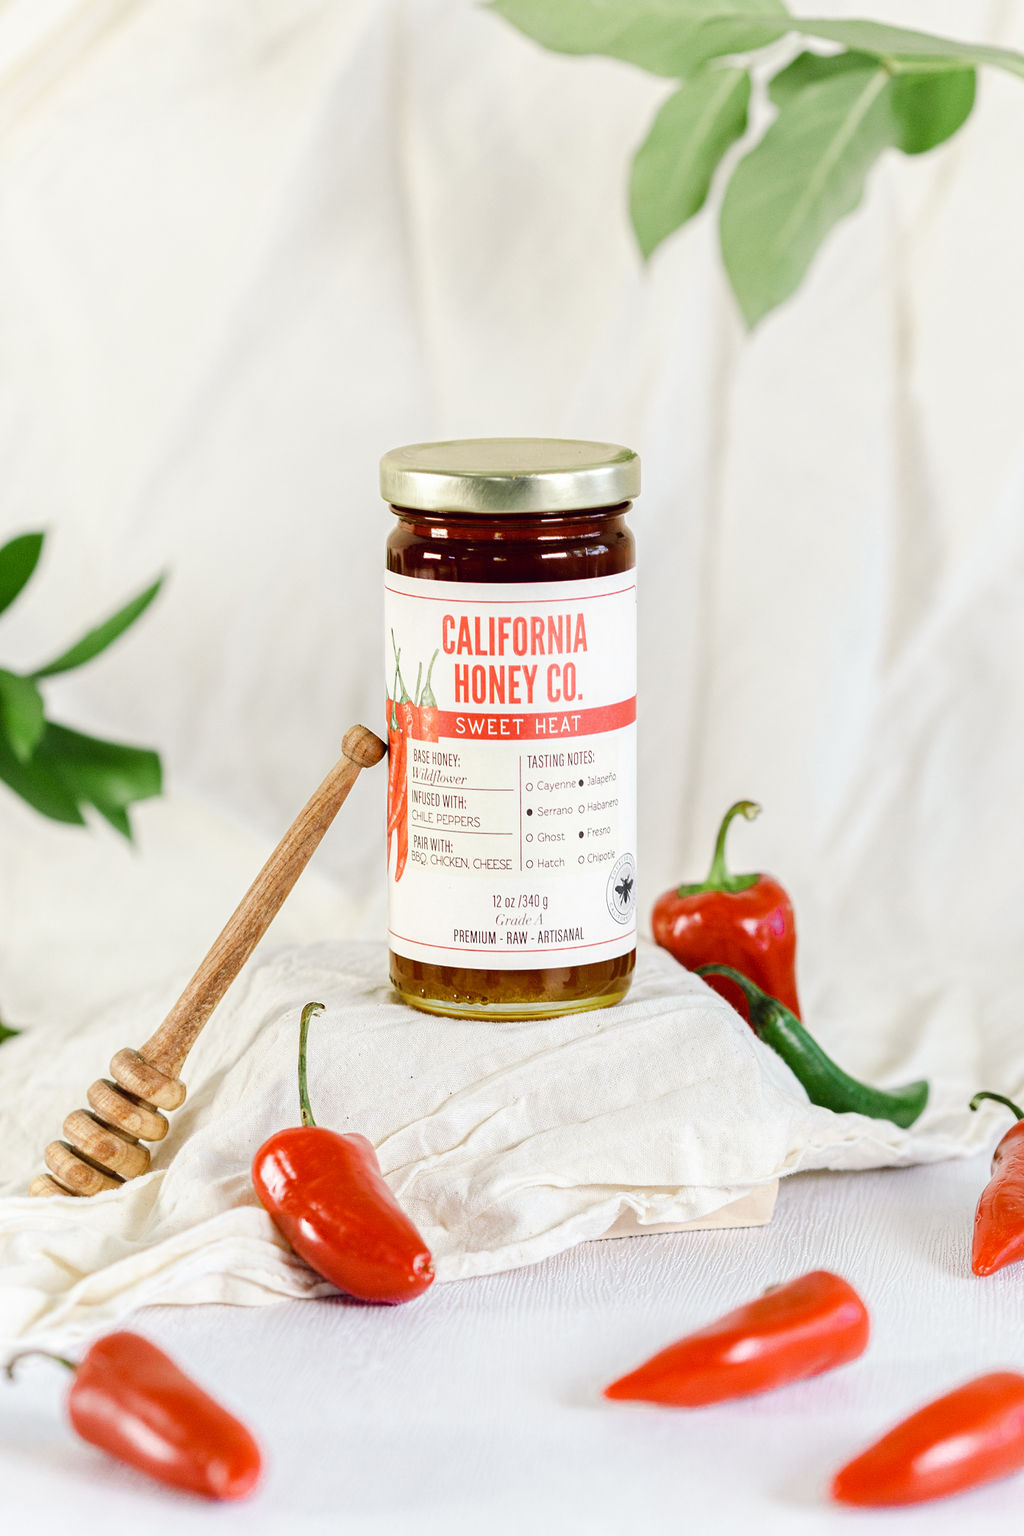 Chili Pepper Jalapeno Food Styling for Spicy Hot Honey by San Diego Lifestyle Product Photographer Chelsea Loren